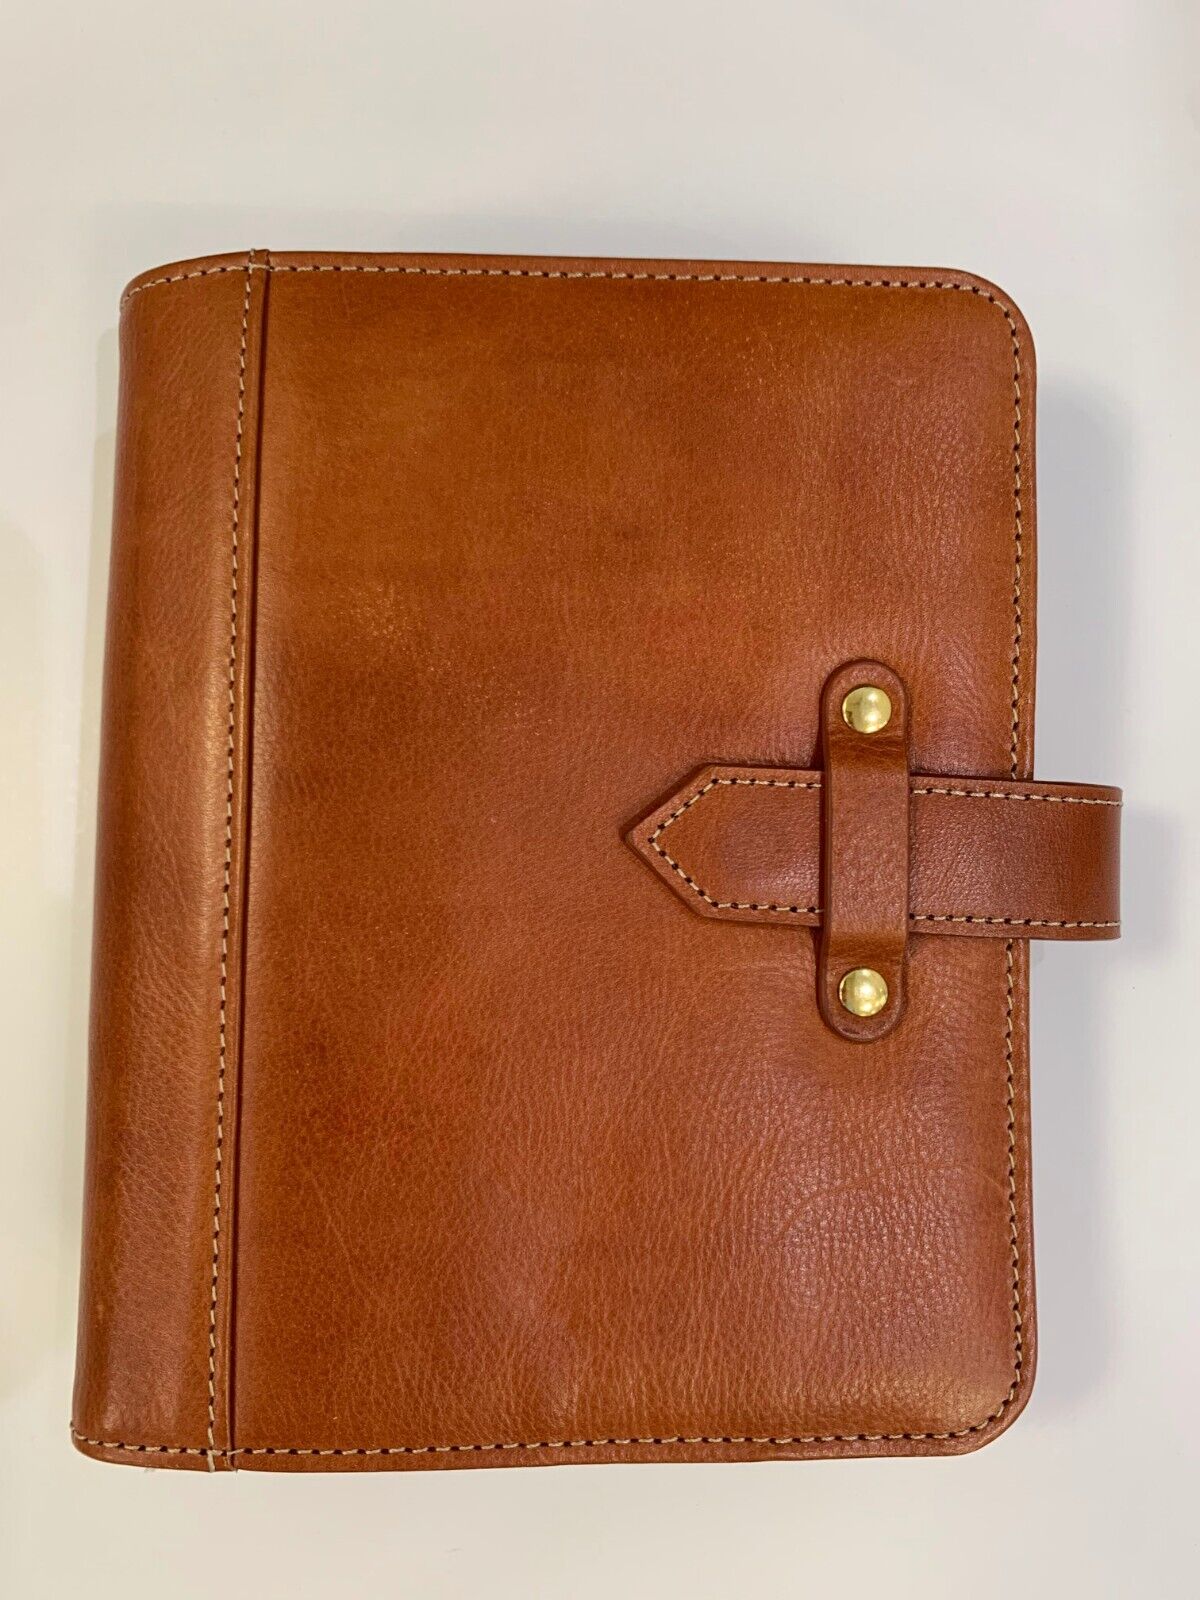 Compact Franklin Covey Vintage Aurora Leather Binder | Cognac | 1.25'' Rings